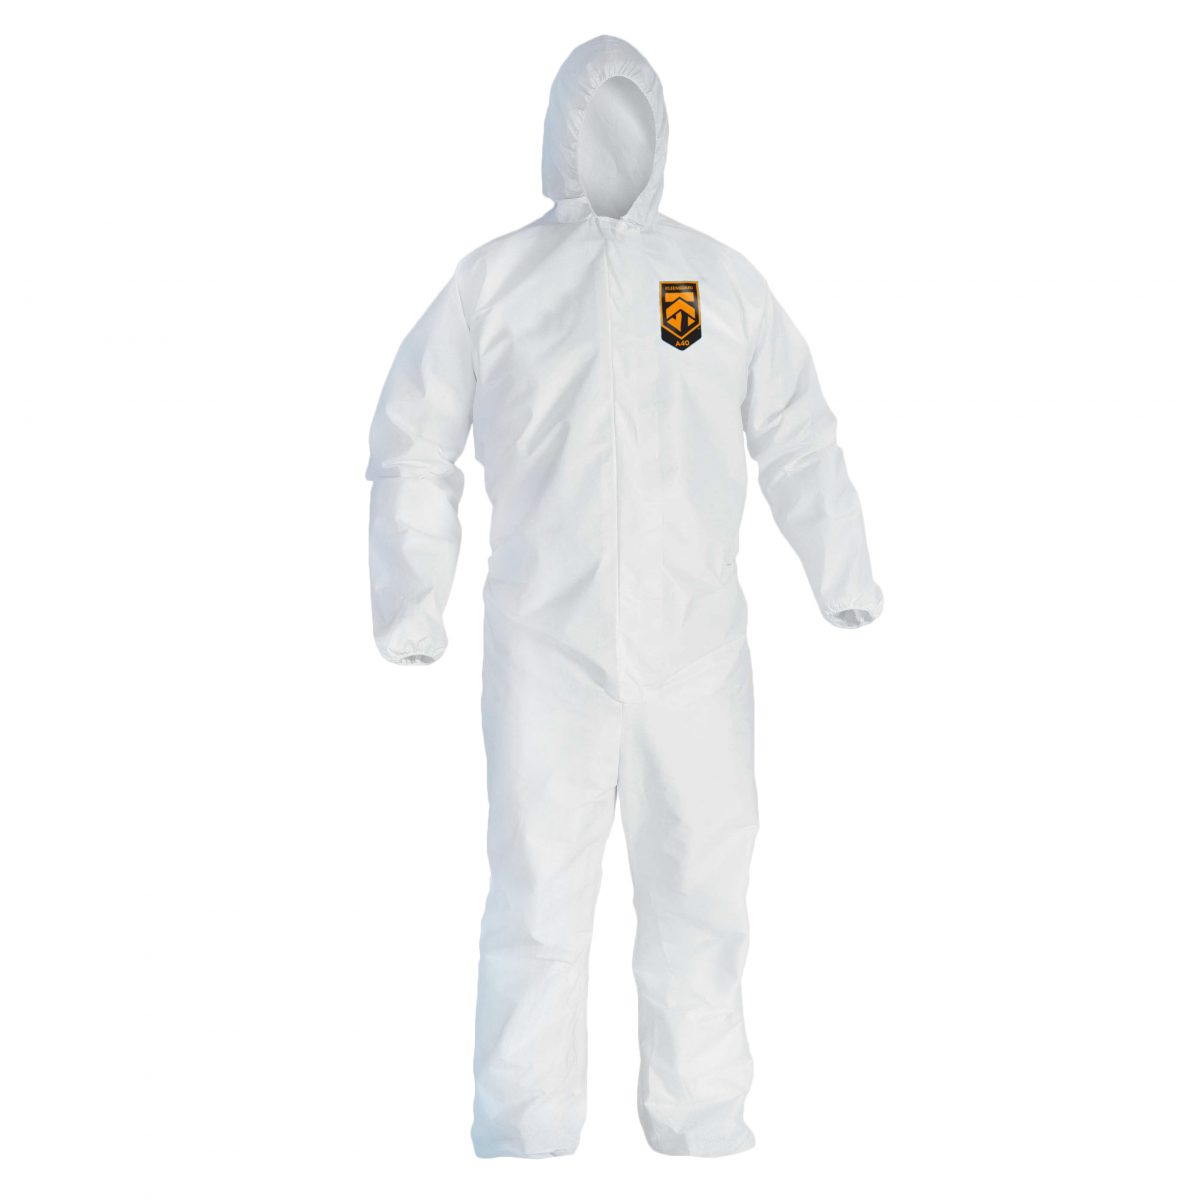 kleenguard liquid and particle protection coverall - Integrity